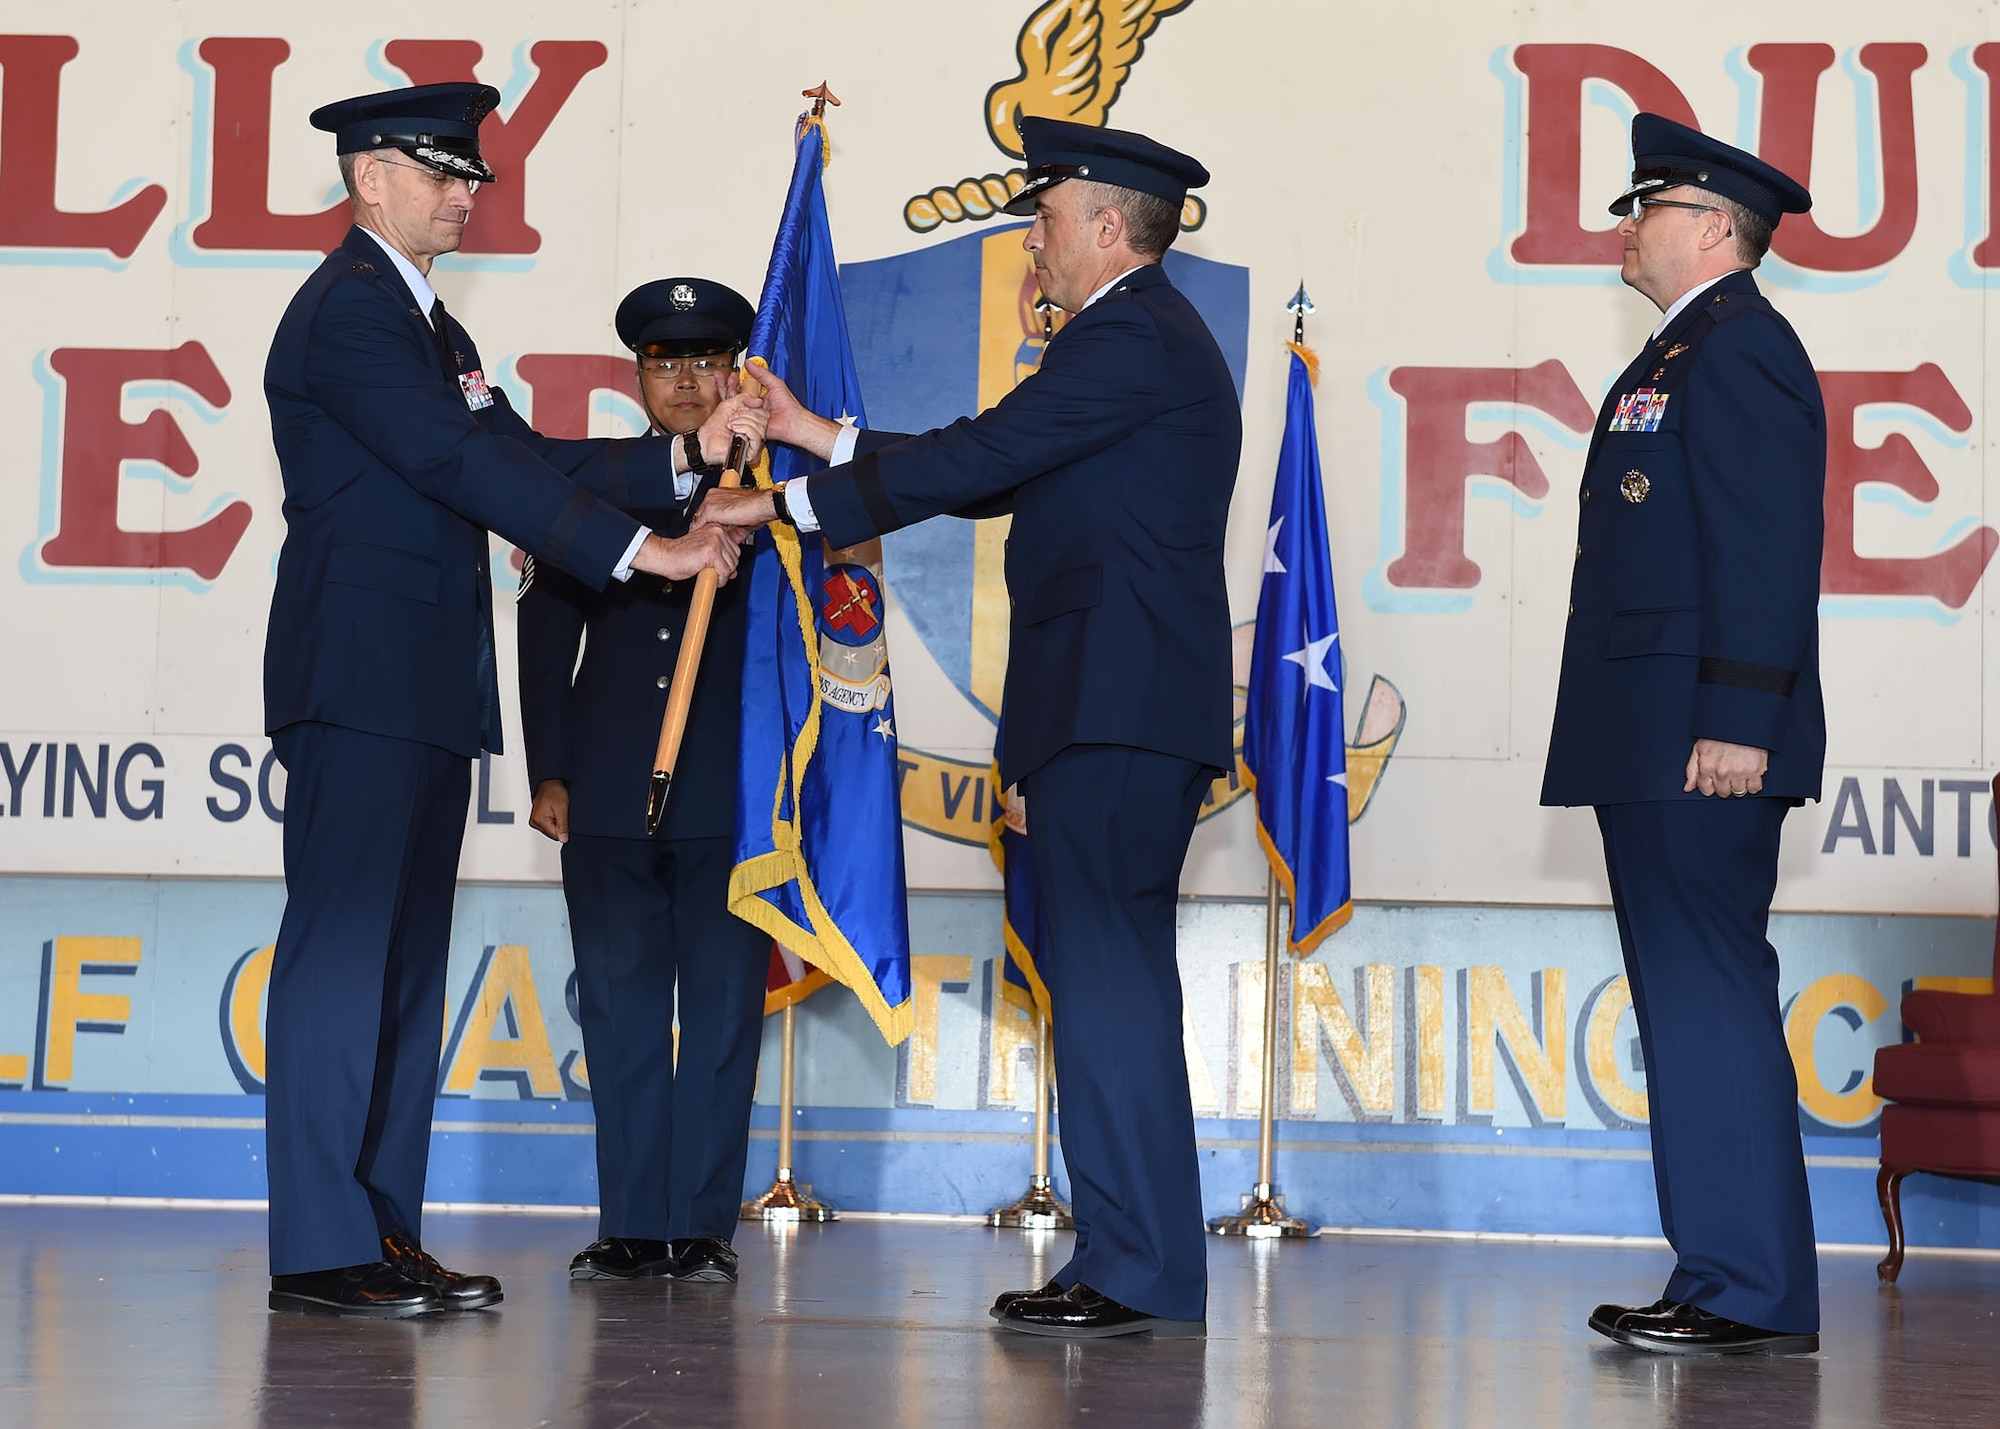 Lt. Gen. Mark A. Ediger (left), Surgeon General of the Air Force, passes the Air Force Medical Operations Agency guidon to Brig. Gen. Robert I. Miller (center), incoming AFMOA commander, during a May 6 change of command ceremony at Port San Antonio. In military tradition, the passing of a unit guidon signifies relinquishing or accepting command of that unit. (U.S. Air Force photo / Tech. Sgt. Christopher Carwile.)